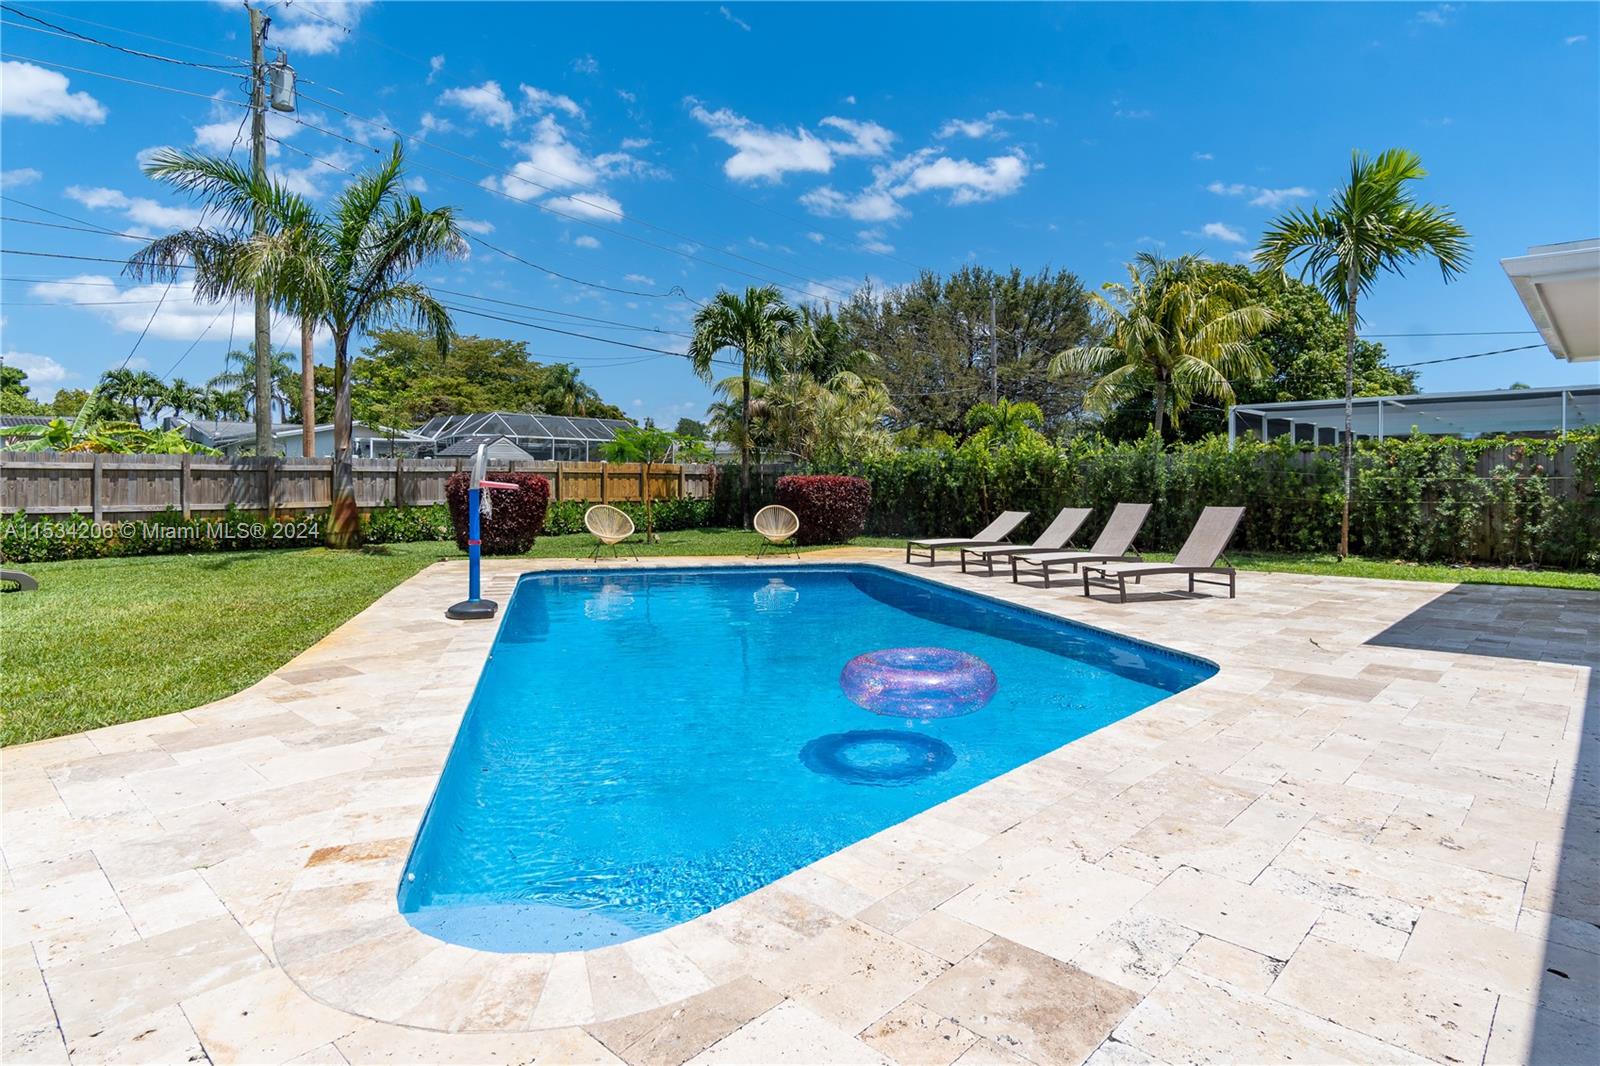 a view of a swimming pool with a patio and a garden